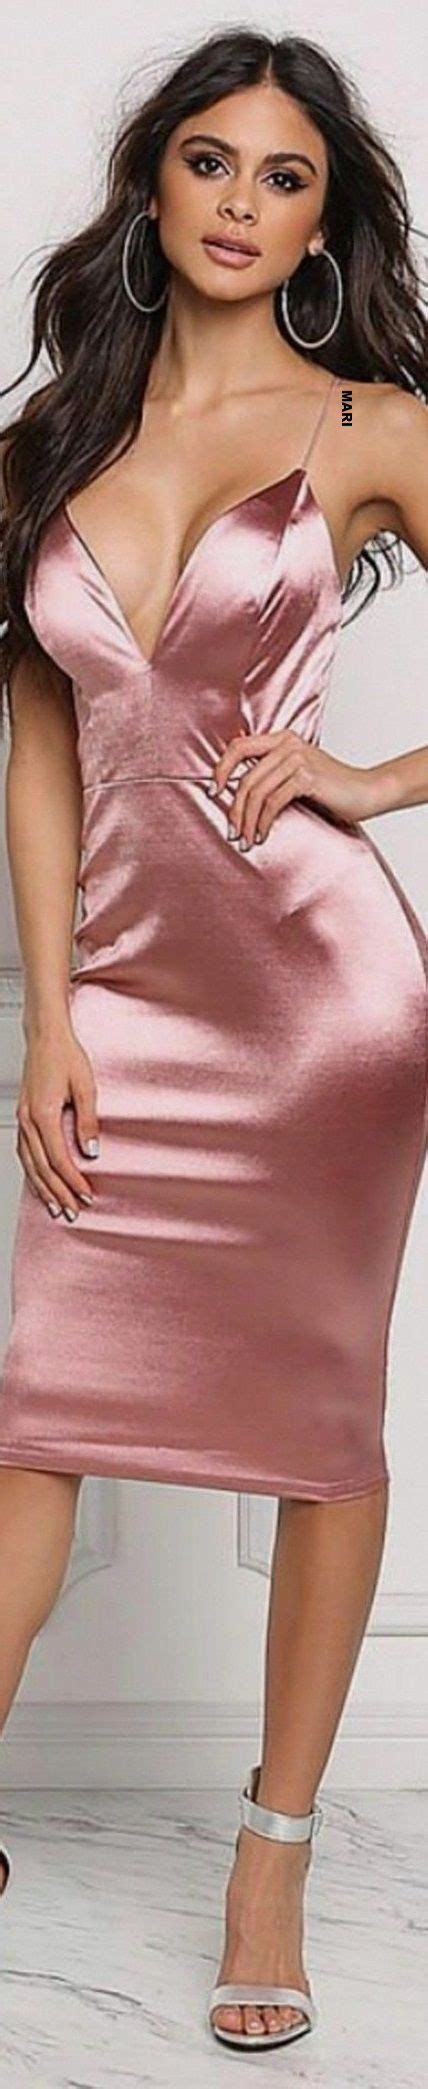 Pin By MARY On AMO ROSA In 2021 Fashion Bodycon Dress